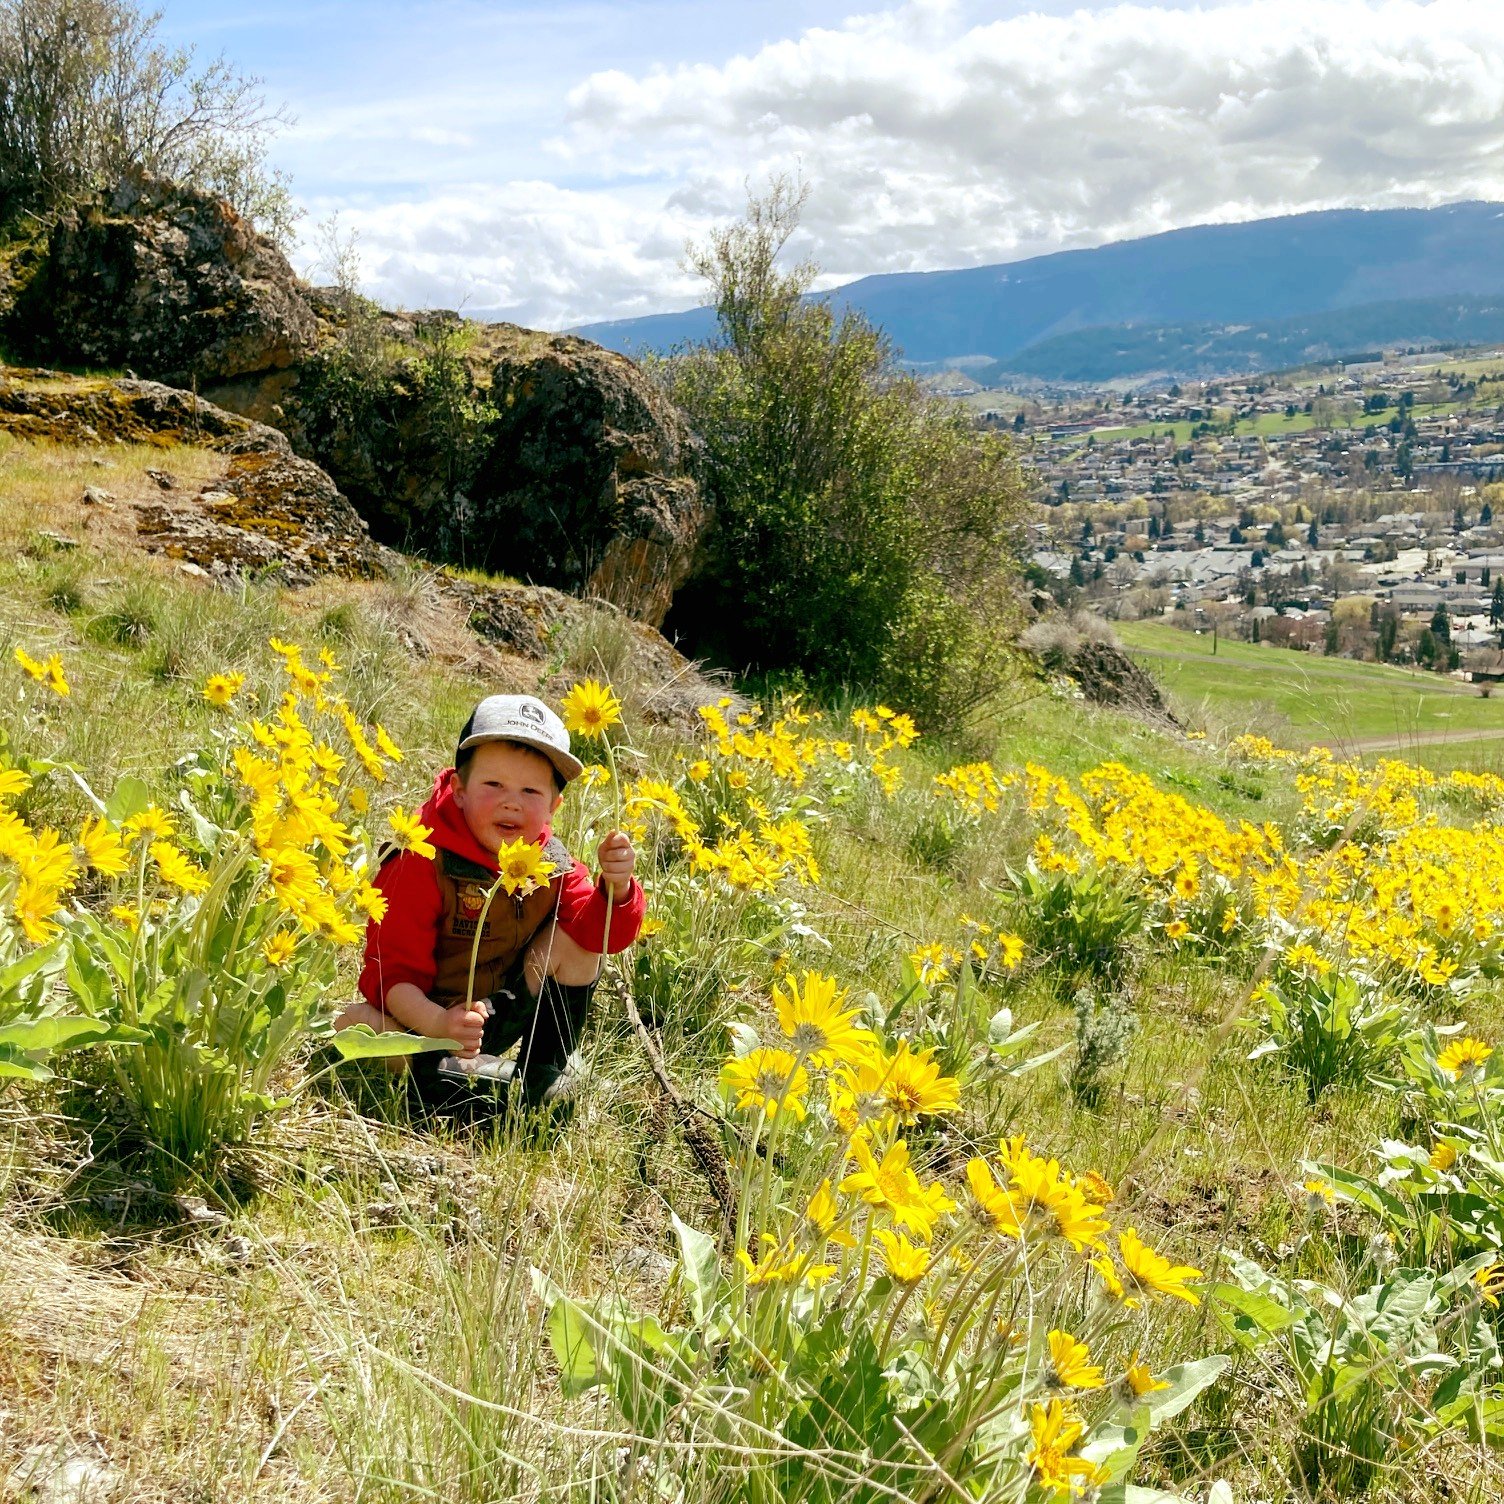 The Bella Vista hills are spectacular with an abundance of blooming Okanagan Sunflowers.

The scientific name is &quot;Balsamorhiza sagittata&quot;. Better known as Arrowleaf balsamroot. What do you call it?

They won't last long, so take a walk and 